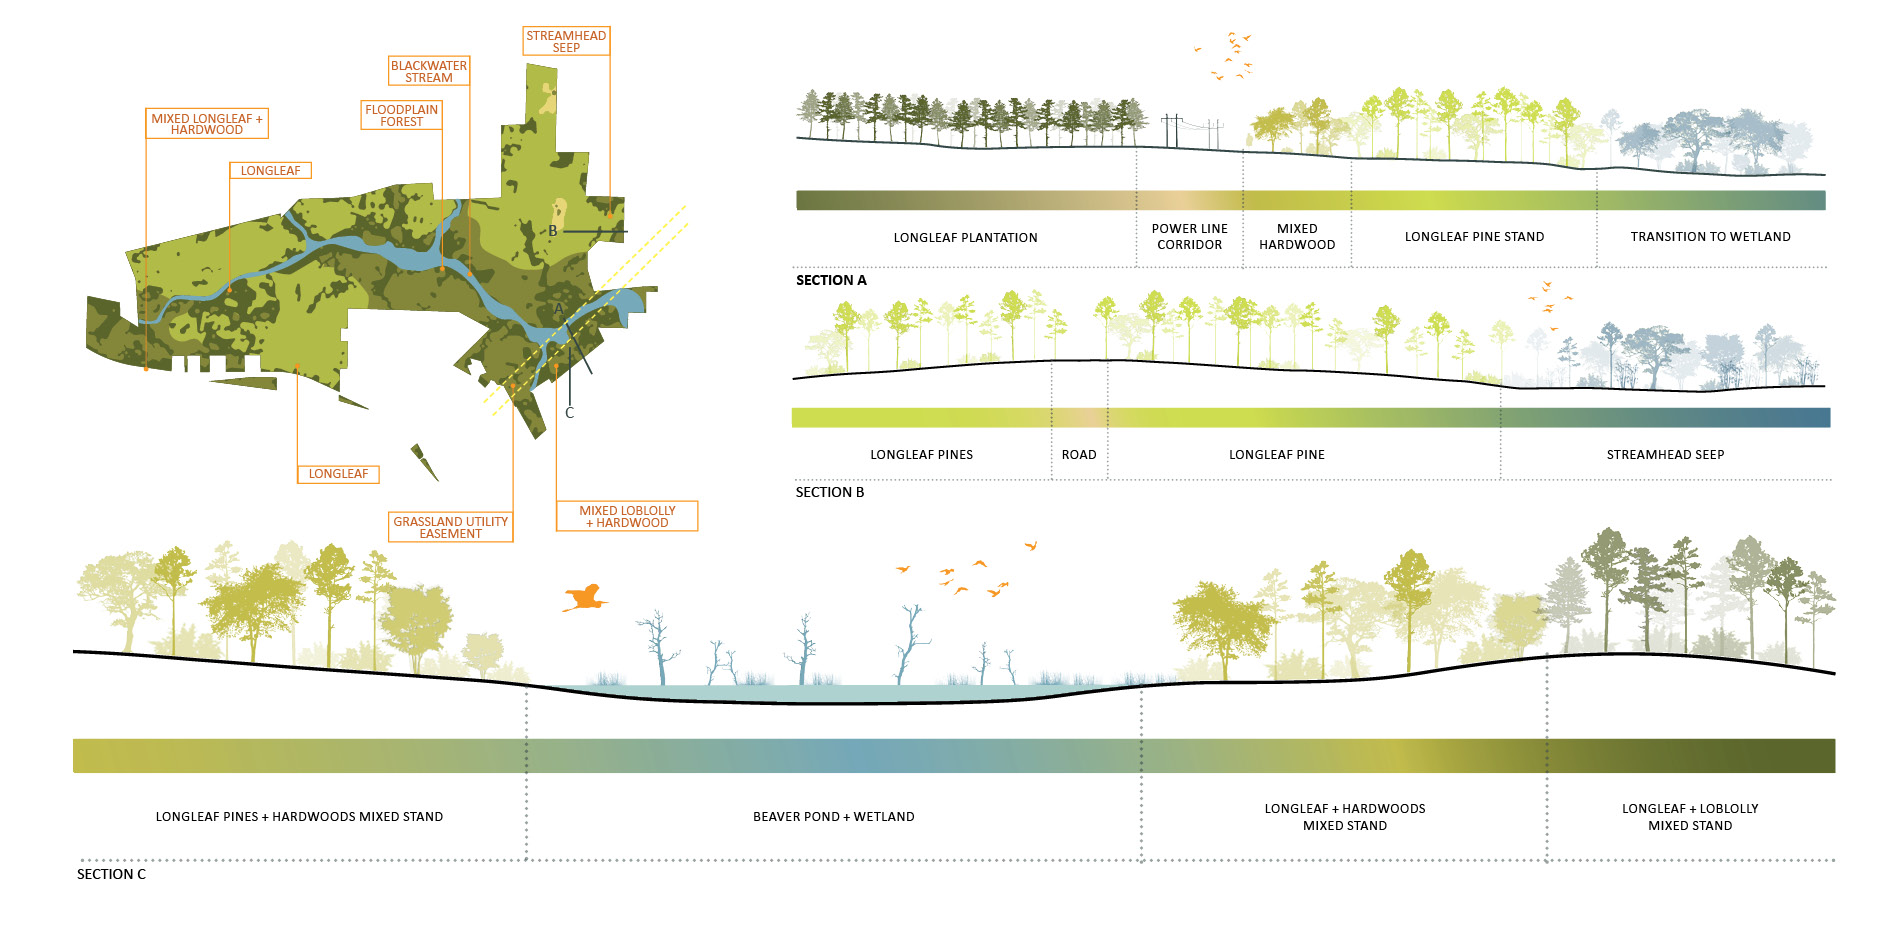 Ecological Communities and Site Characteristics